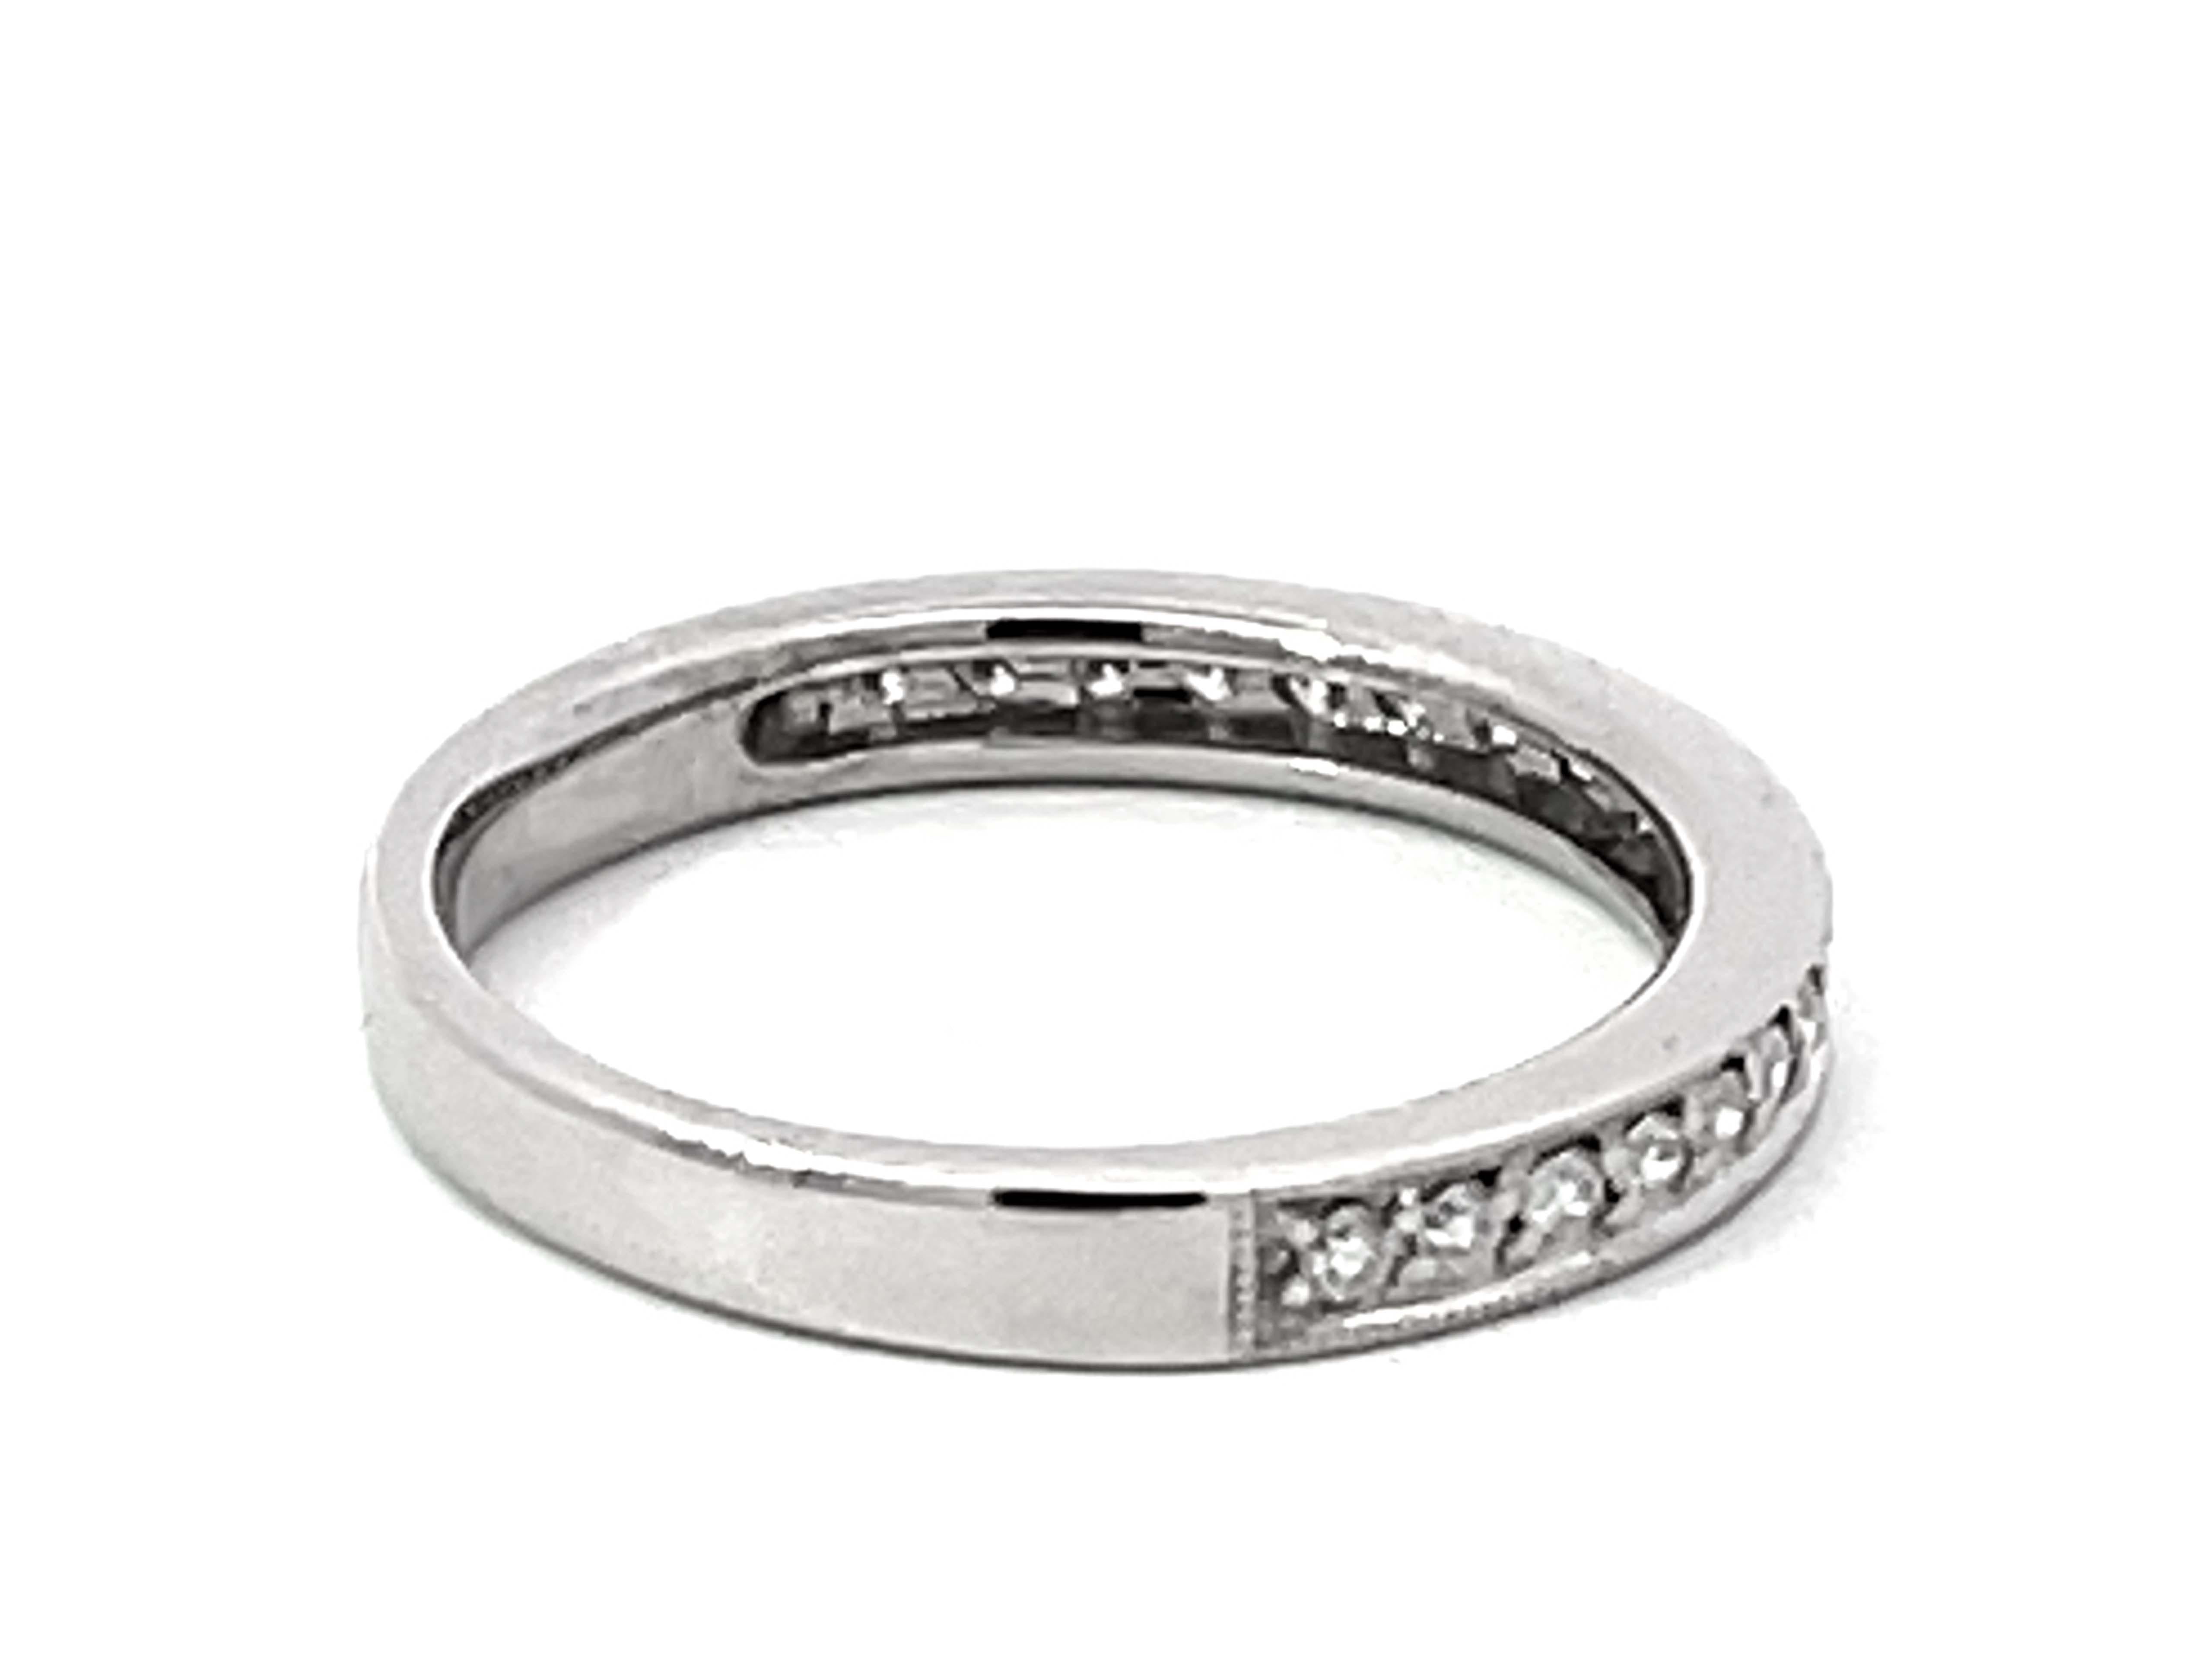 Women's or Men's Brilliant Cut Diamond Band Ring Solid 14k White Gold For Sale